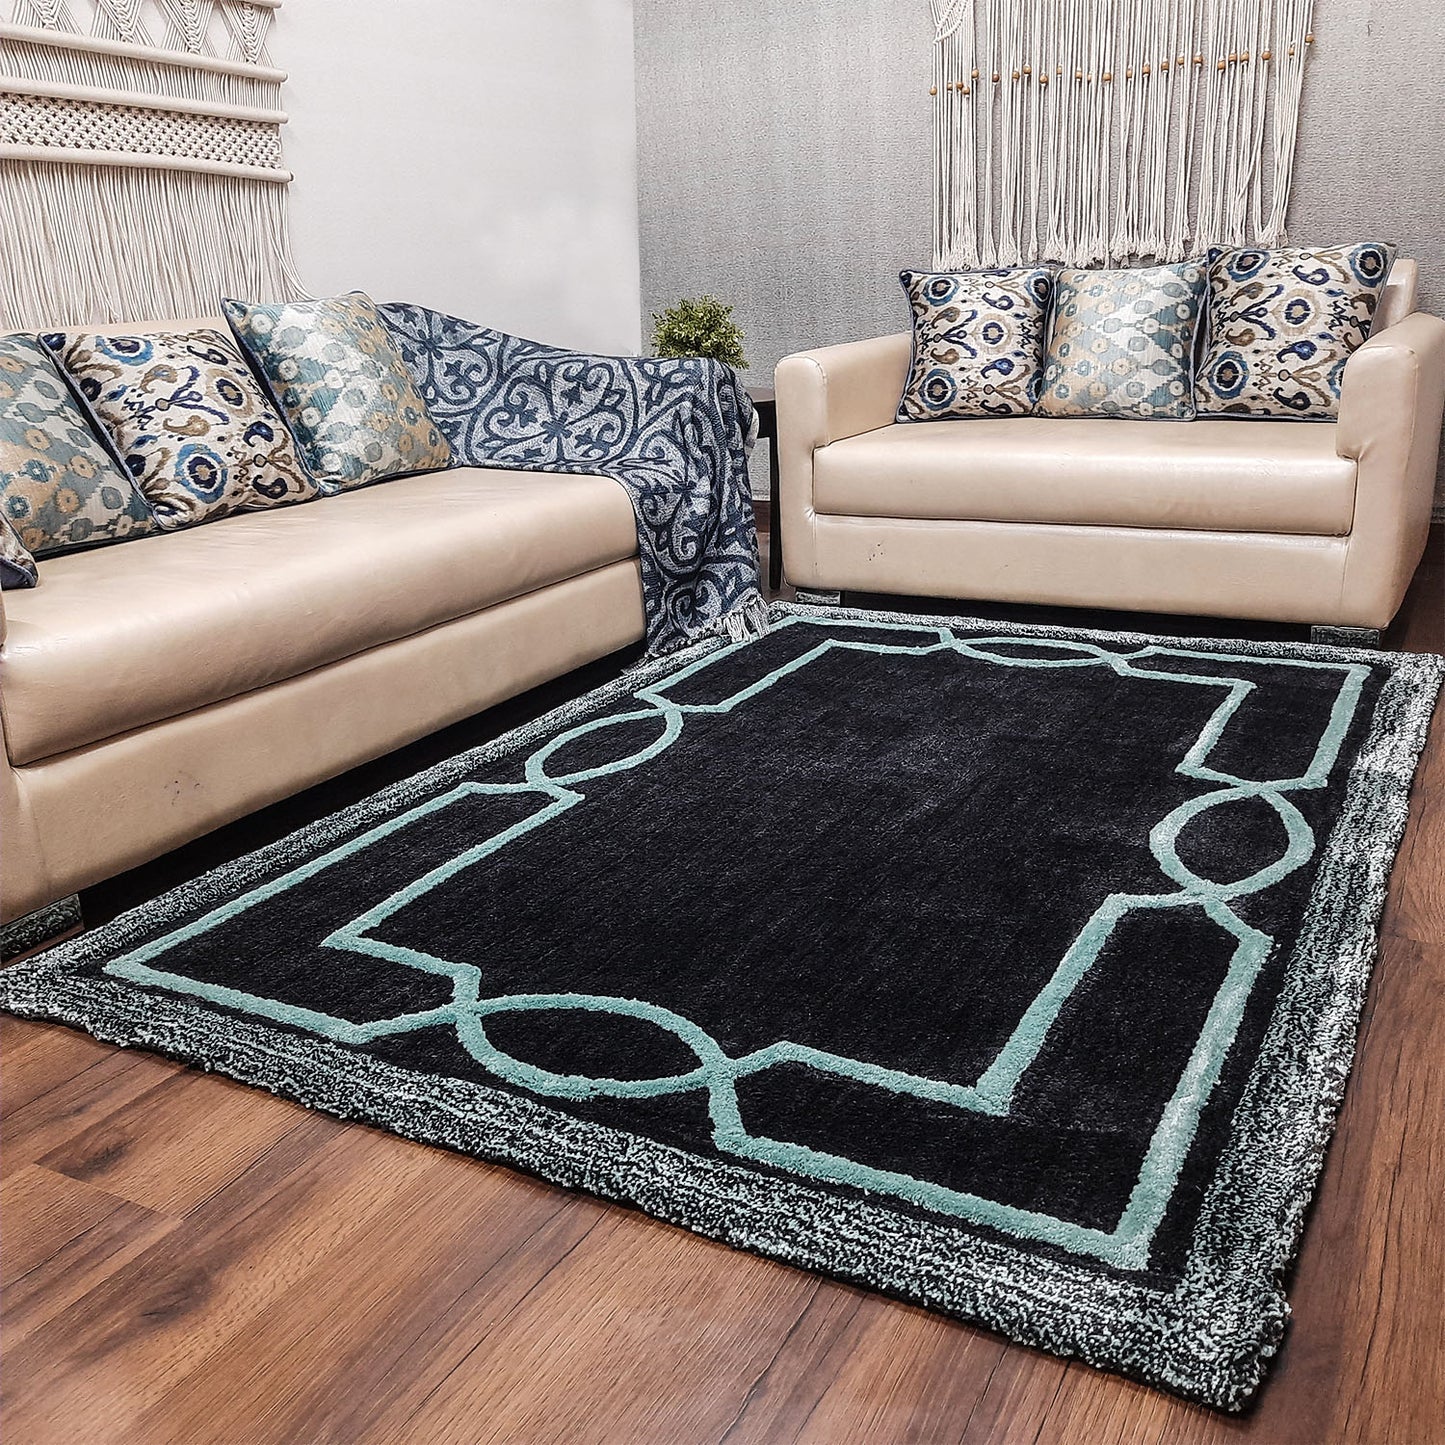 Avioni Luxury Collection- Plush Luxury Dark Grey and Aqua Tone Carpet with 3d Traditional Design -Different Sizes Shaggy Fluffy Rugs and Carpet for Living Room